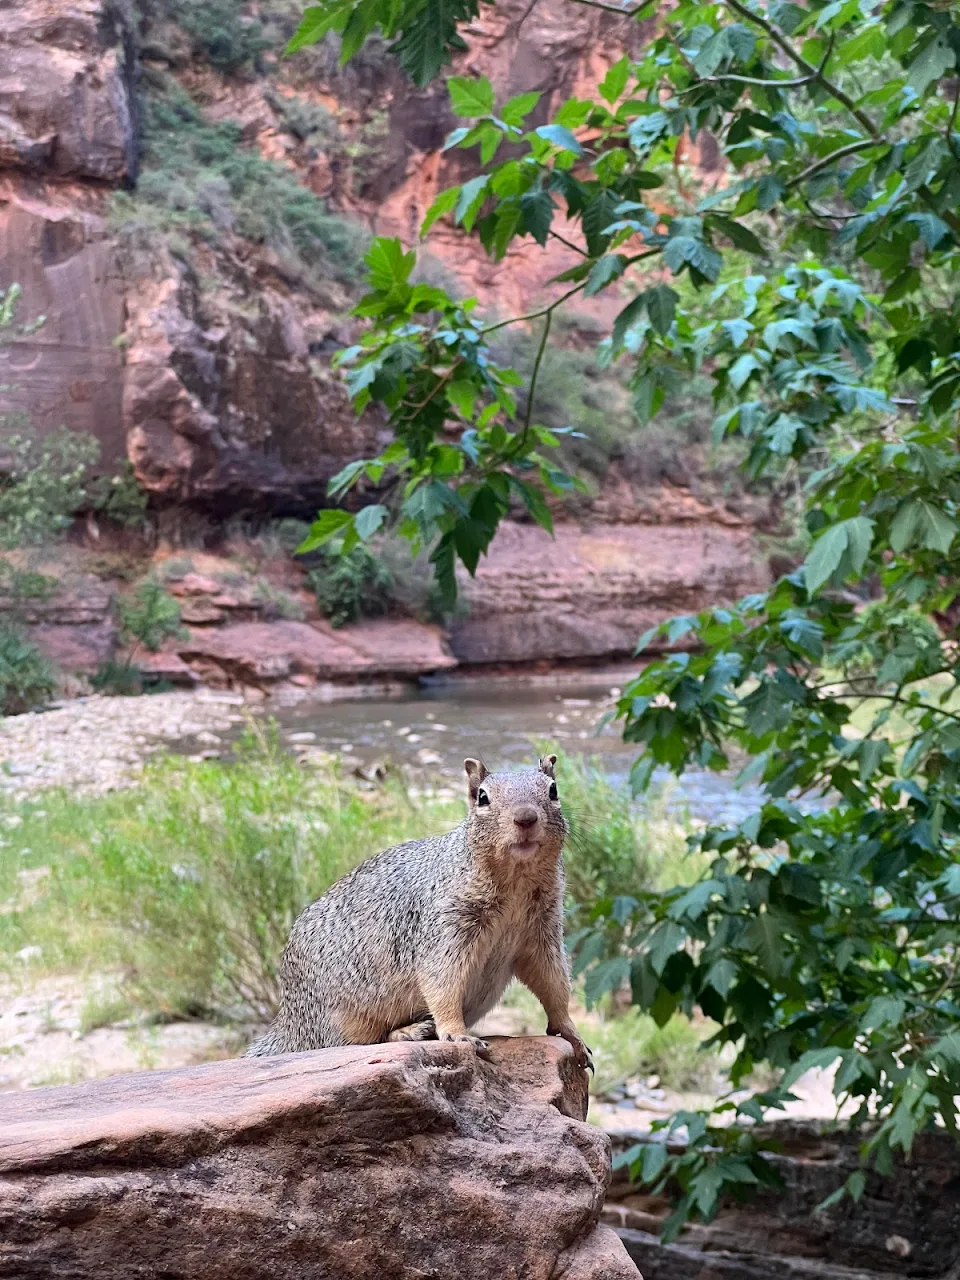 This squirrel in Zion National Park